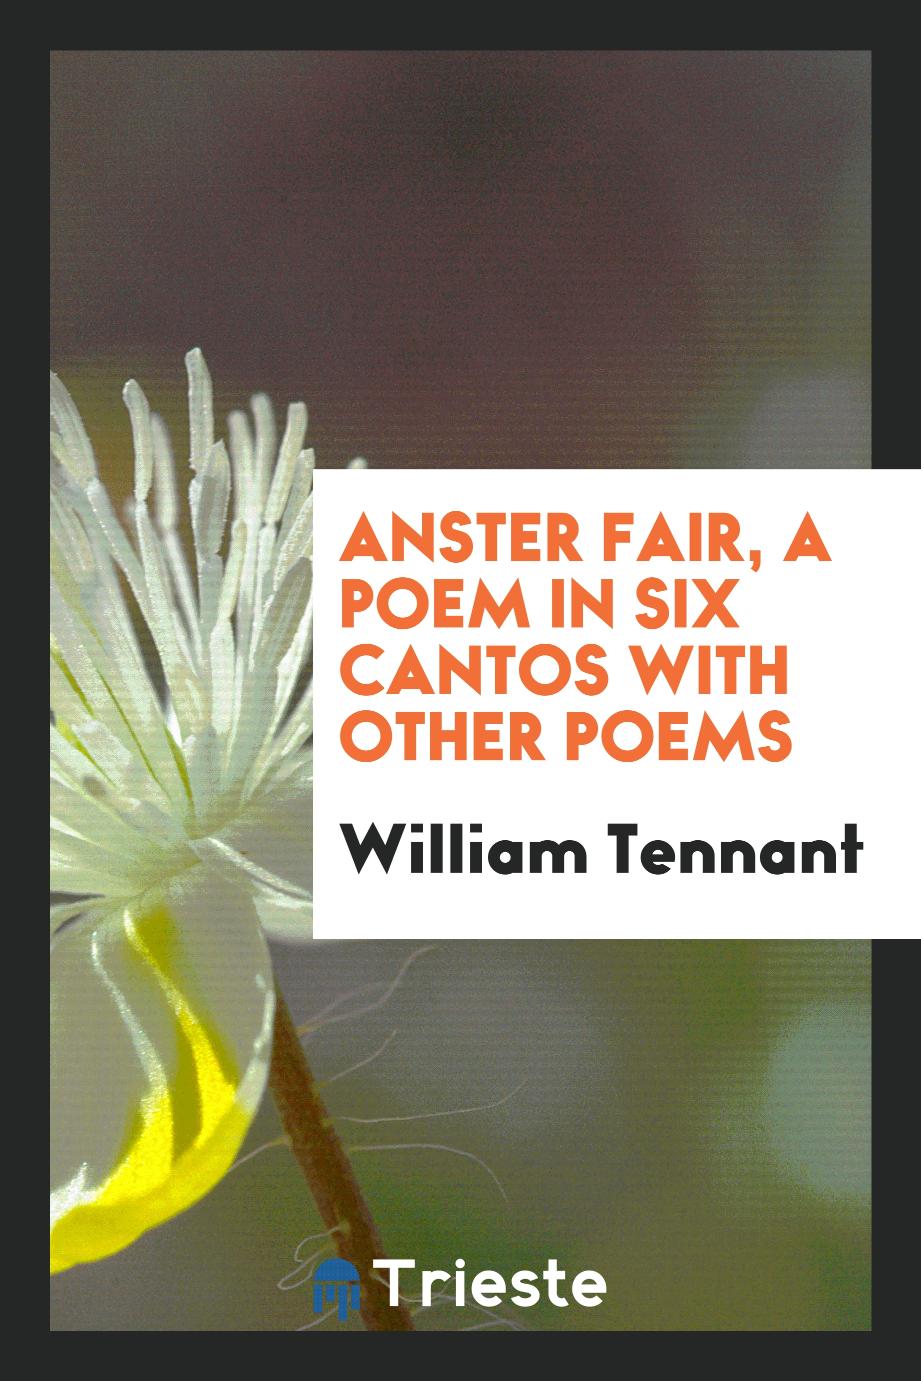 William Tennant - Anster Fair, a poem in six cantos with other poems